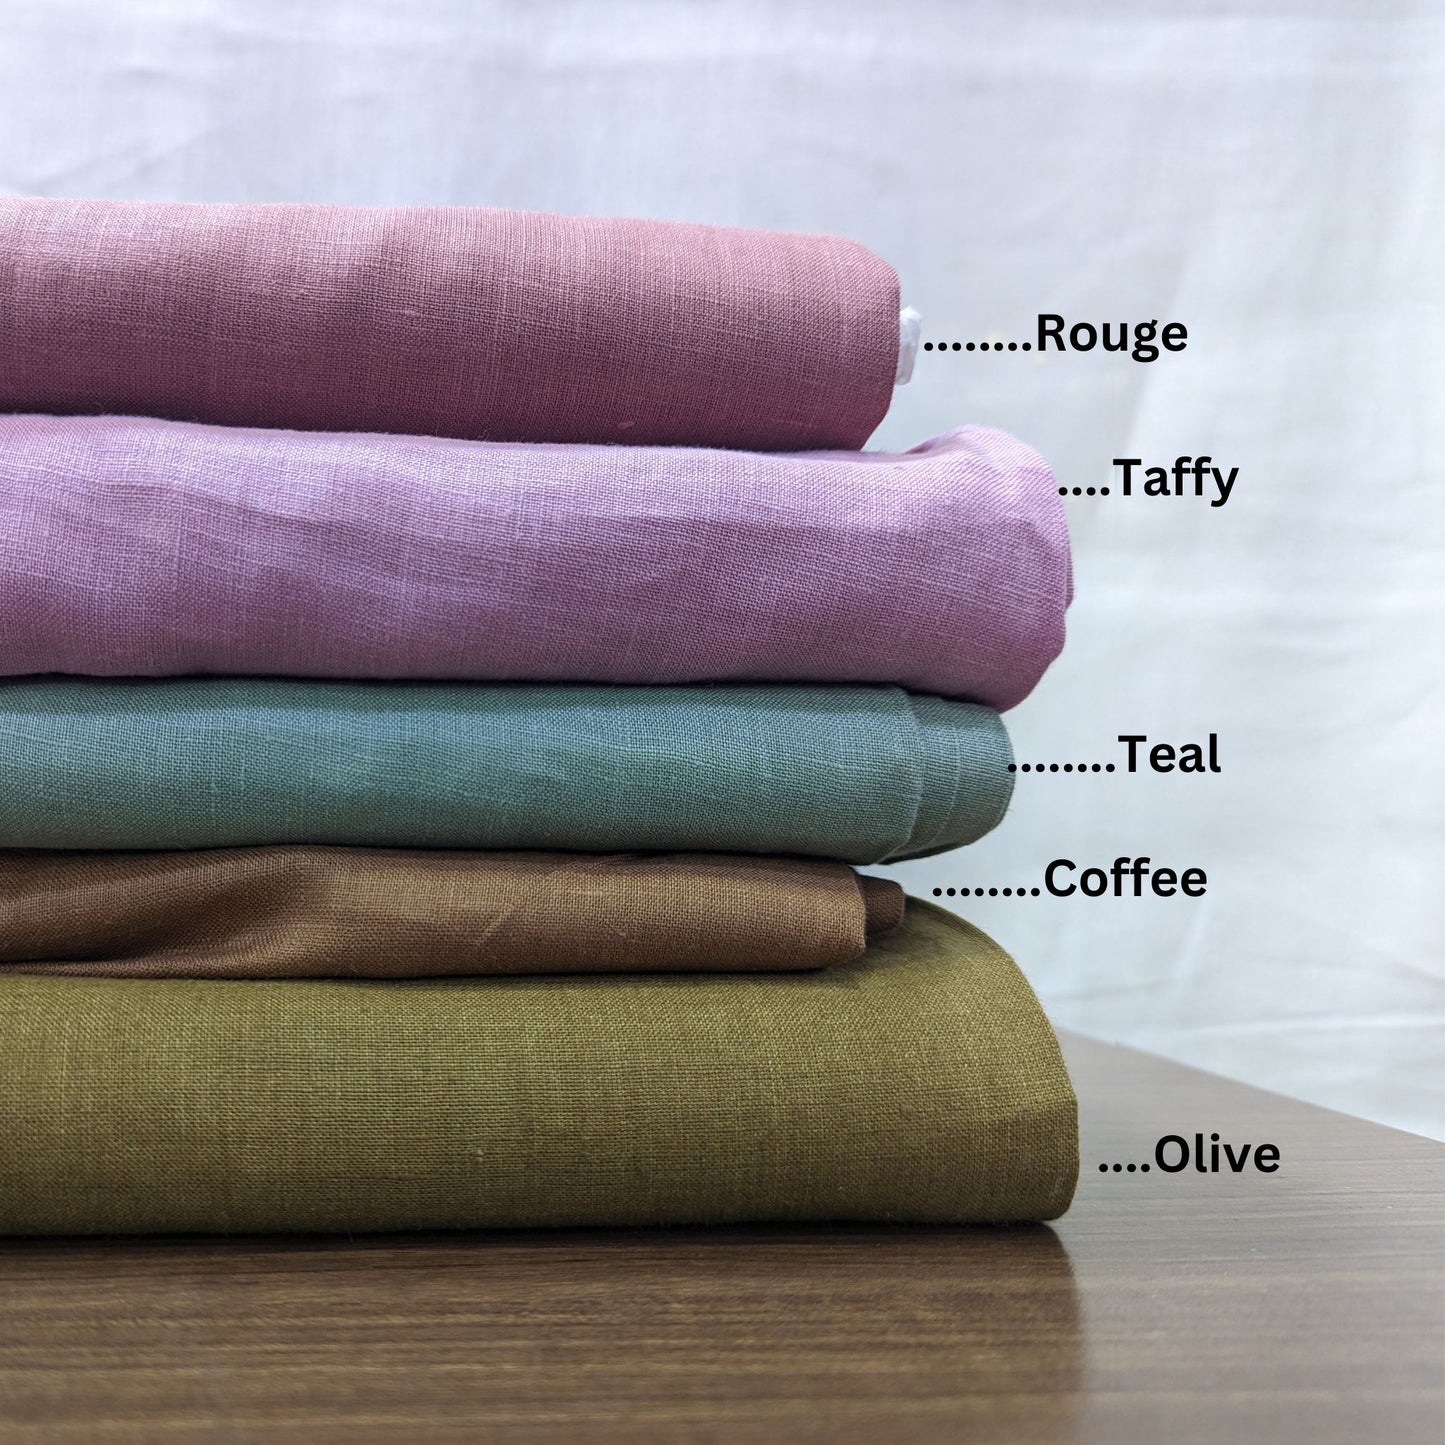 Vintage: Versatile Pure Linen Fabric, Used for Shirts, Casual Pants, Bedding, CORDs - OrganoLinen